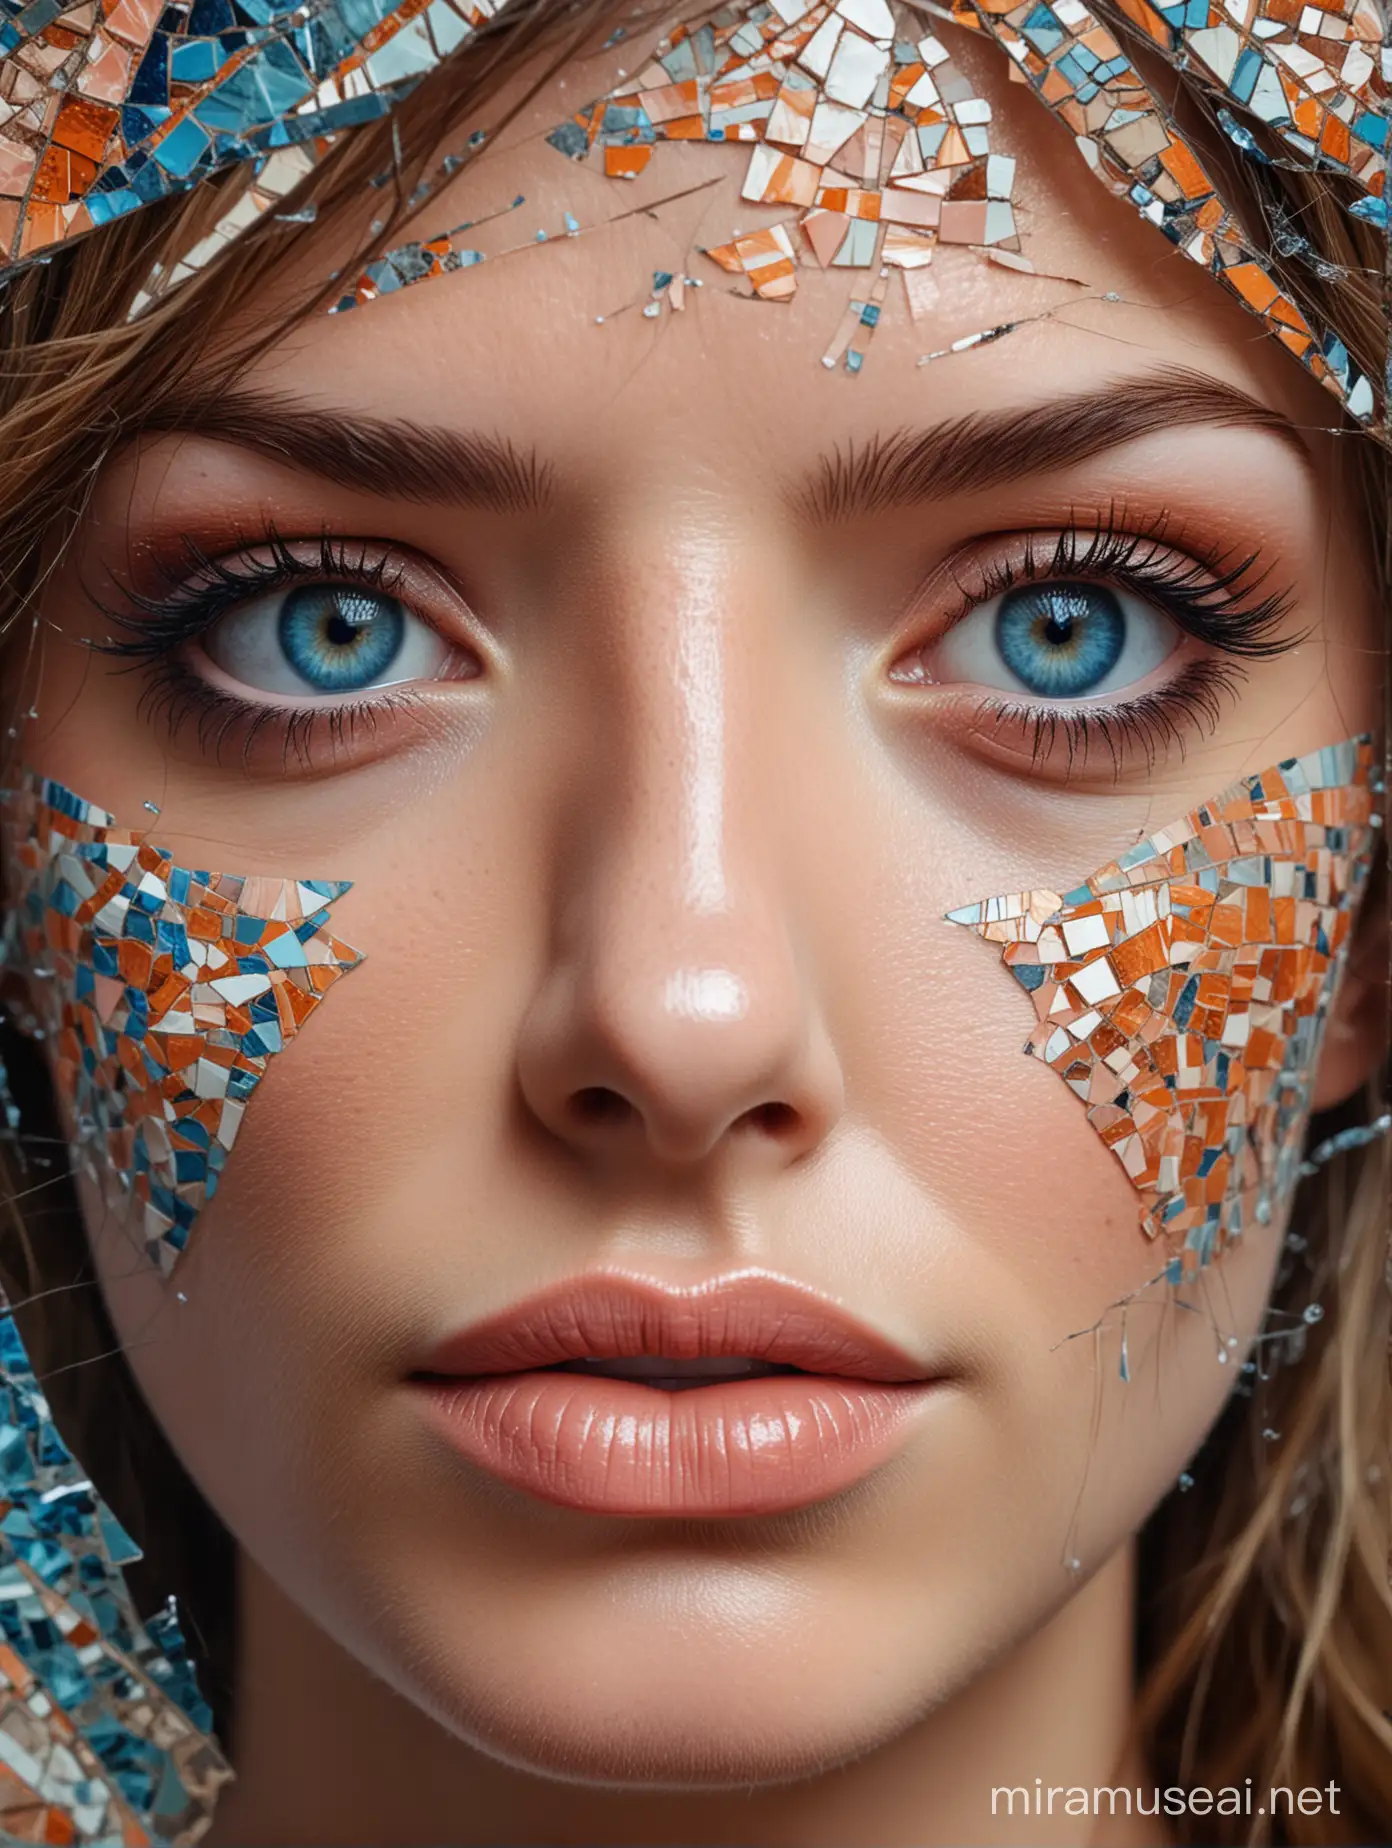 A close-up portrait of a woman's face in a mosaic collage style. The woman is facing forward symmetrically with her blue eyes being the most detailed, making direct contact with the viewer. Her skin is depicted with warm tones of orange and brown, contrasting with cool tones of blue and gray in the shards. The geometric shapes composing her face resemble shattered glass or tiles, with dynamic textures and varied colors. Her lips are slightly parted, in a soft pink hue, adding a natural touch to the abstract and angular composition.